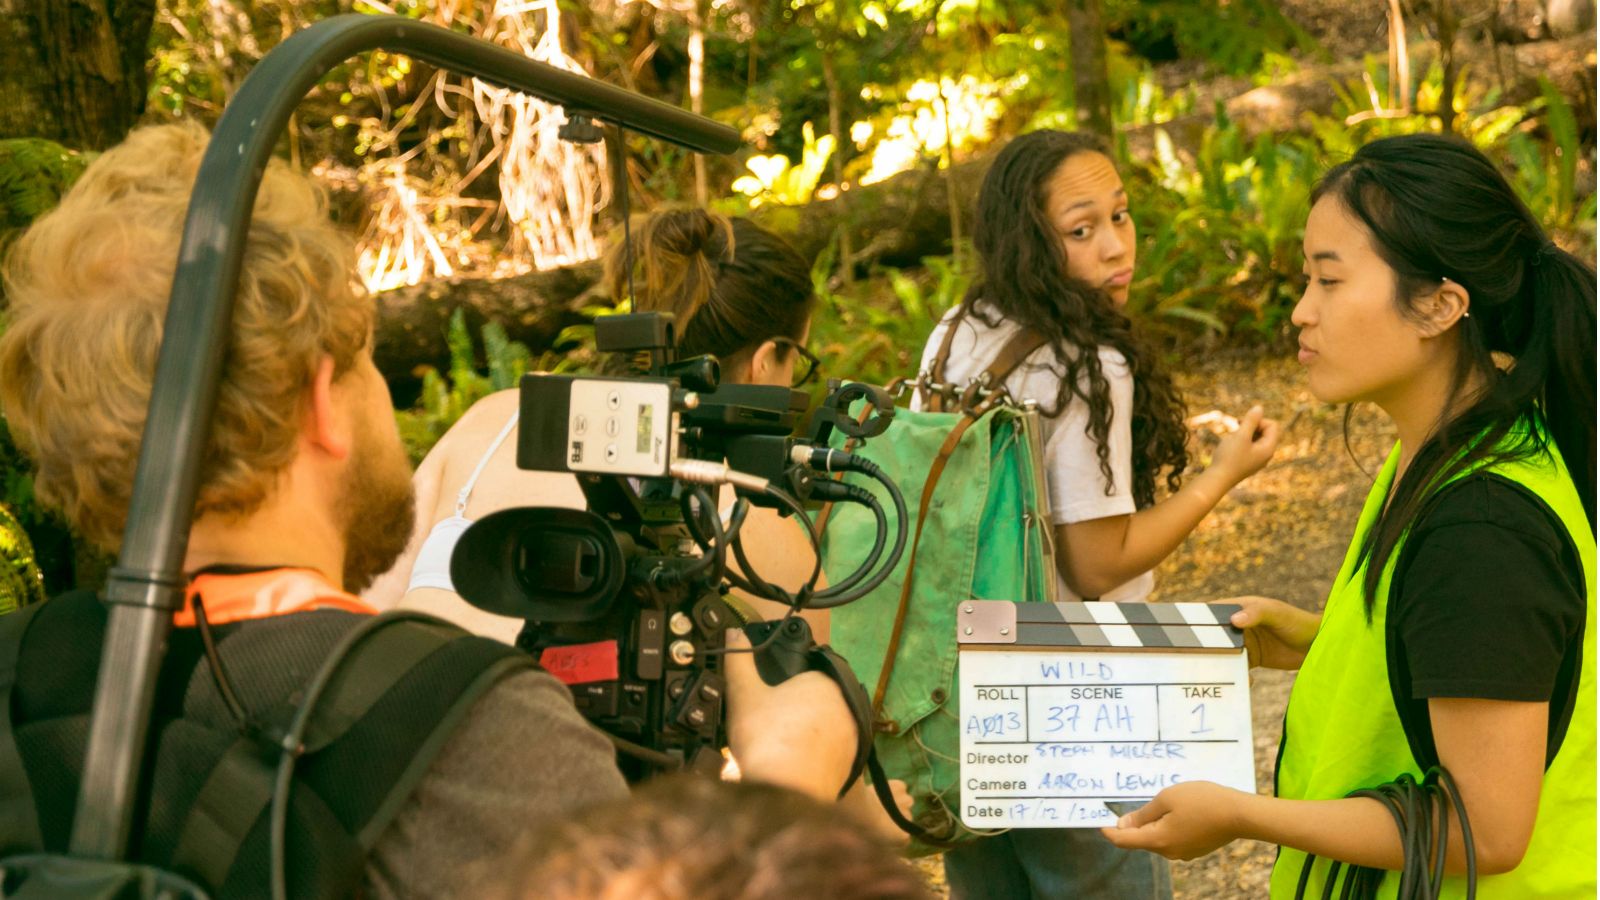 Students as cast and crew in a chiefly reddish yellow and green forest producing a film with essential filmmaking equipment, such as a video camera, clapperboard, cables, and highlighter vests.